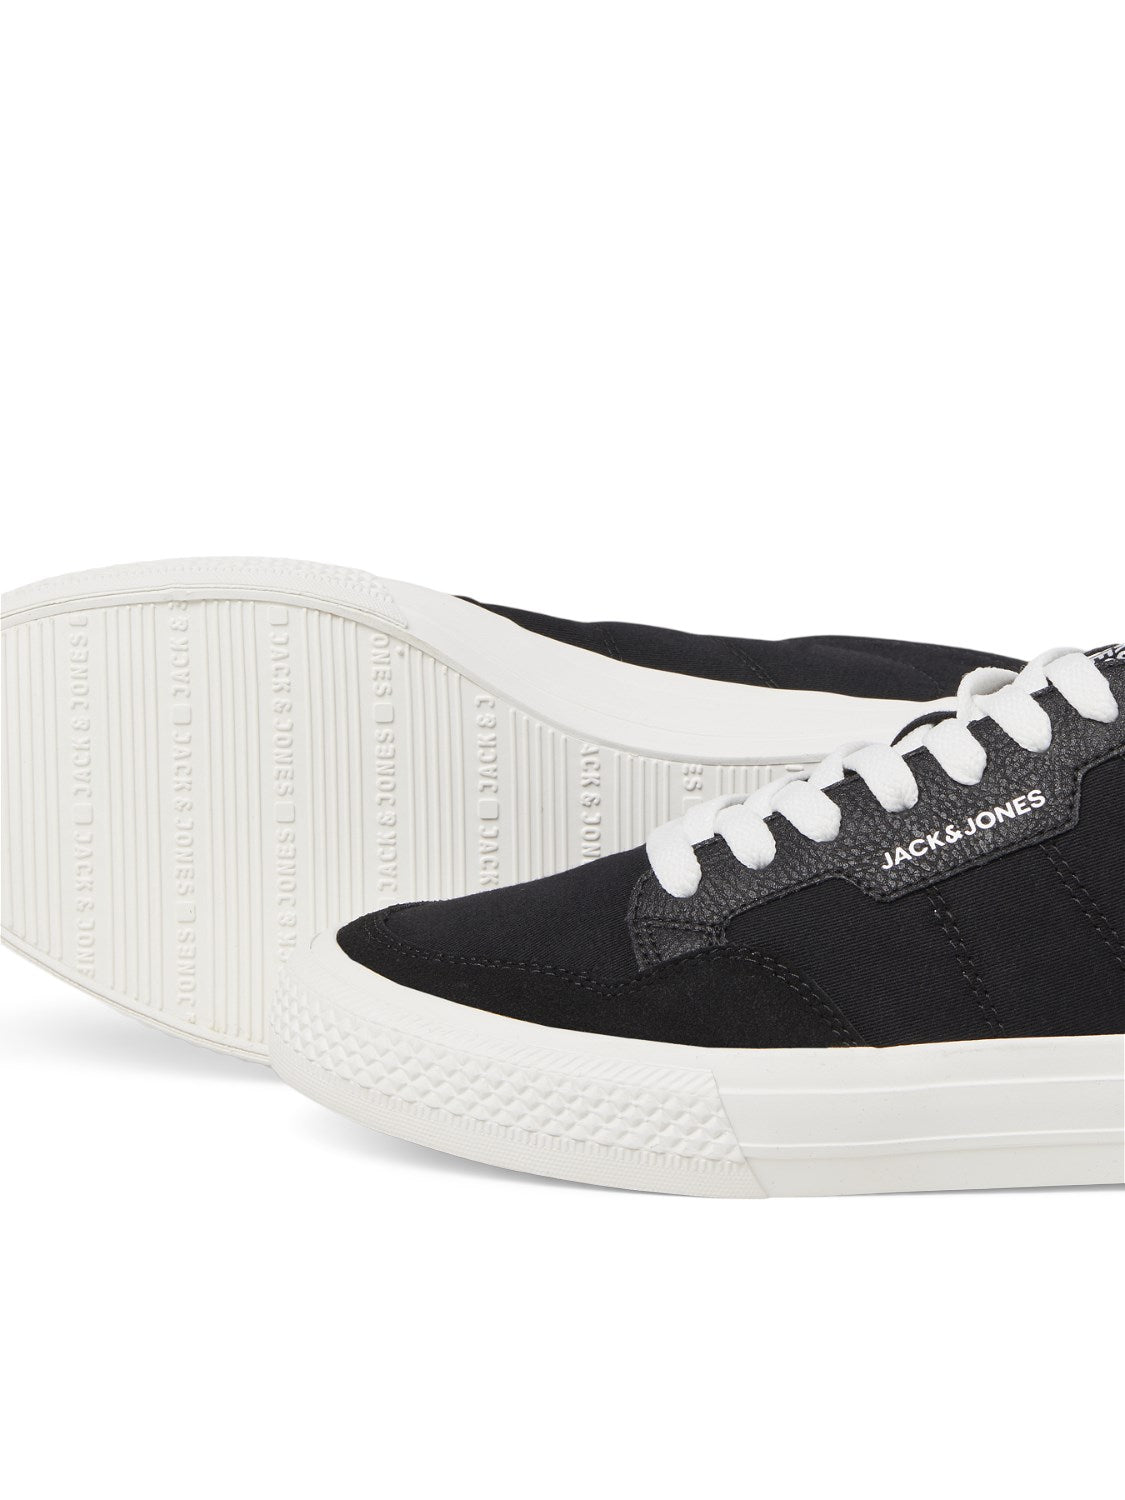 Men's Morden Combo Trainers - Anthracite-Sole View